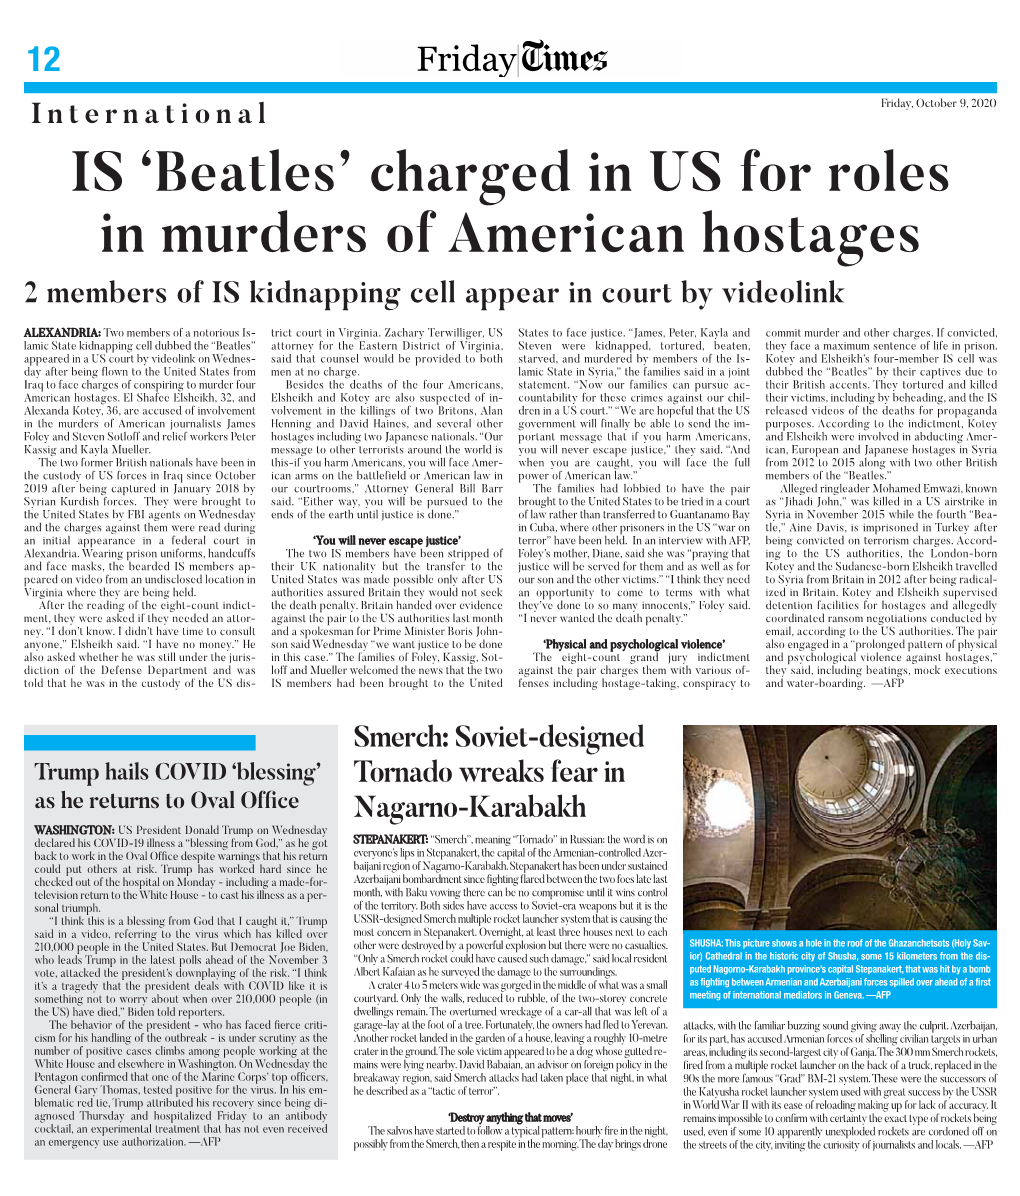 IS 'Beatles' Charged in US for Roles in Murders of American Hostages